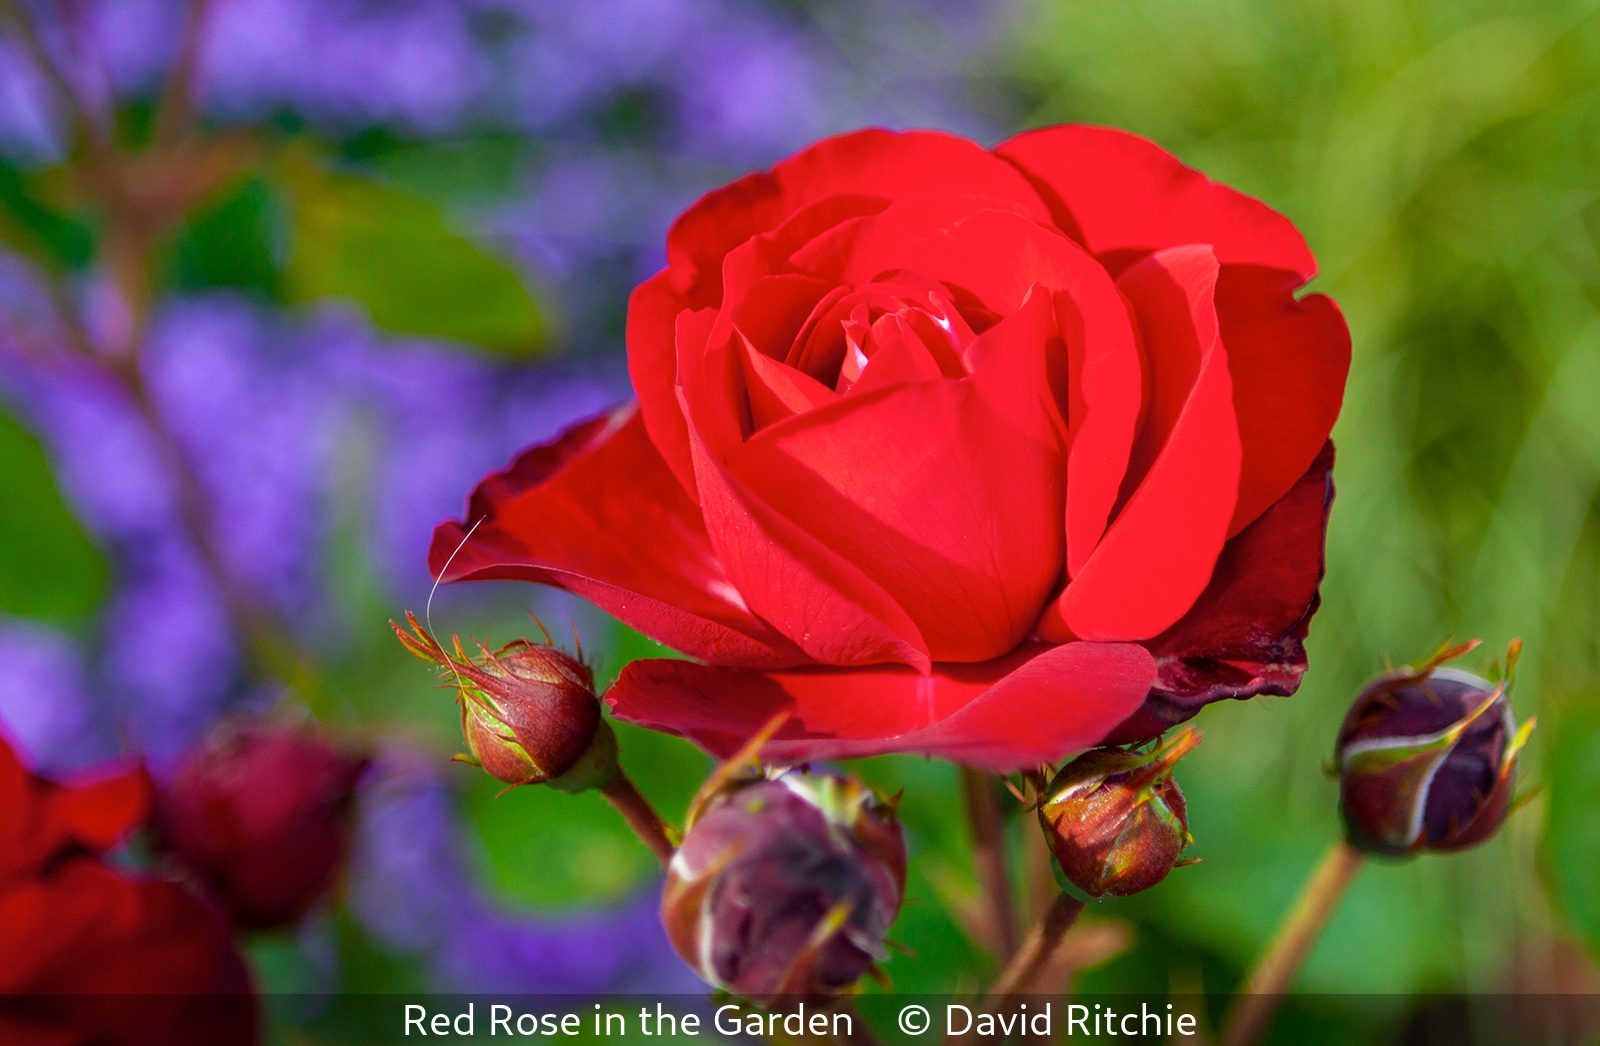 David Ritchie_Red Rose in the Garden